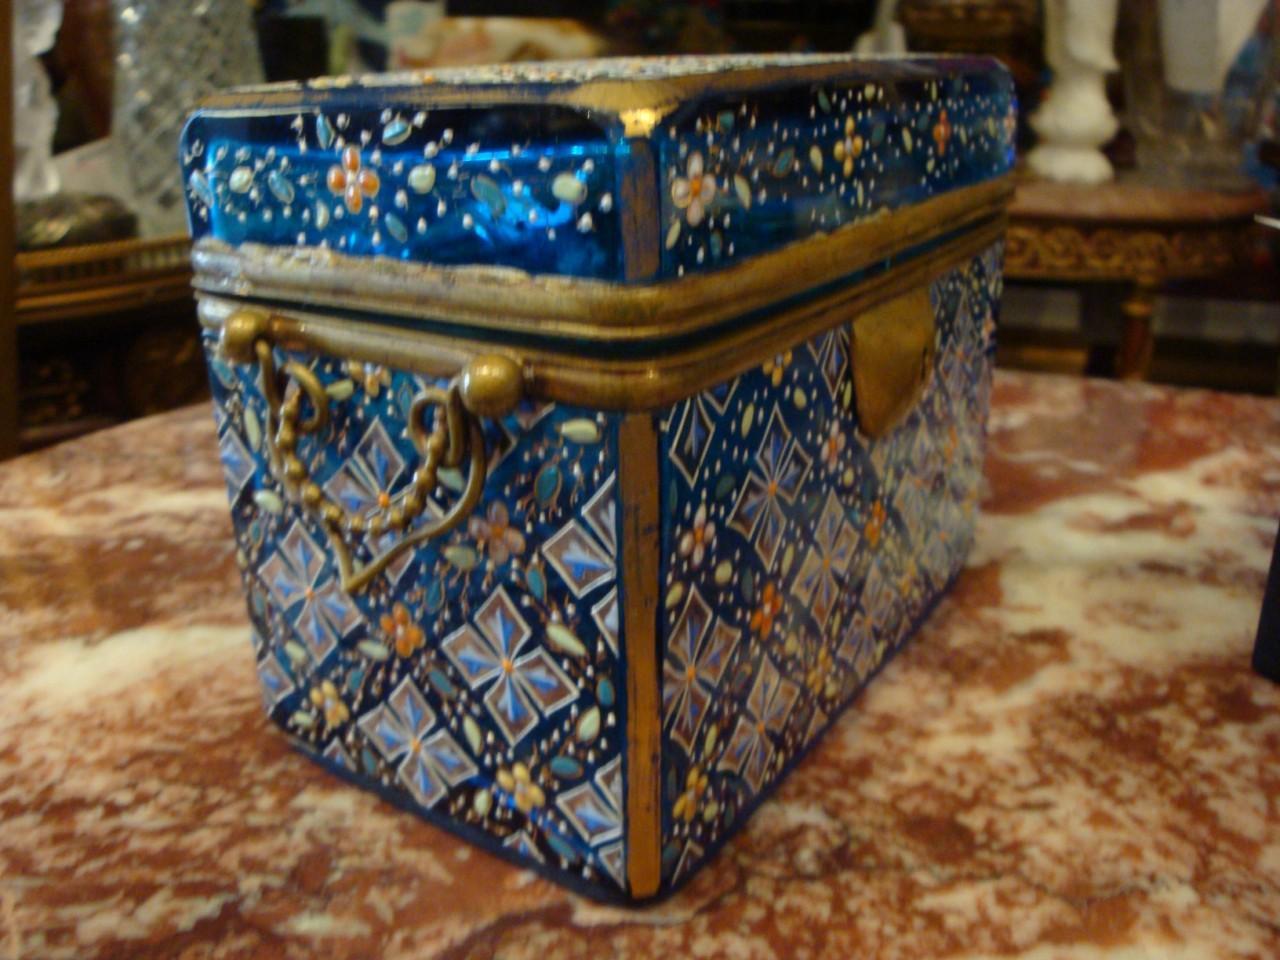 French Extremely Rare Important 19th Century Platinum, Blue, White Floral Moser Box For Sale